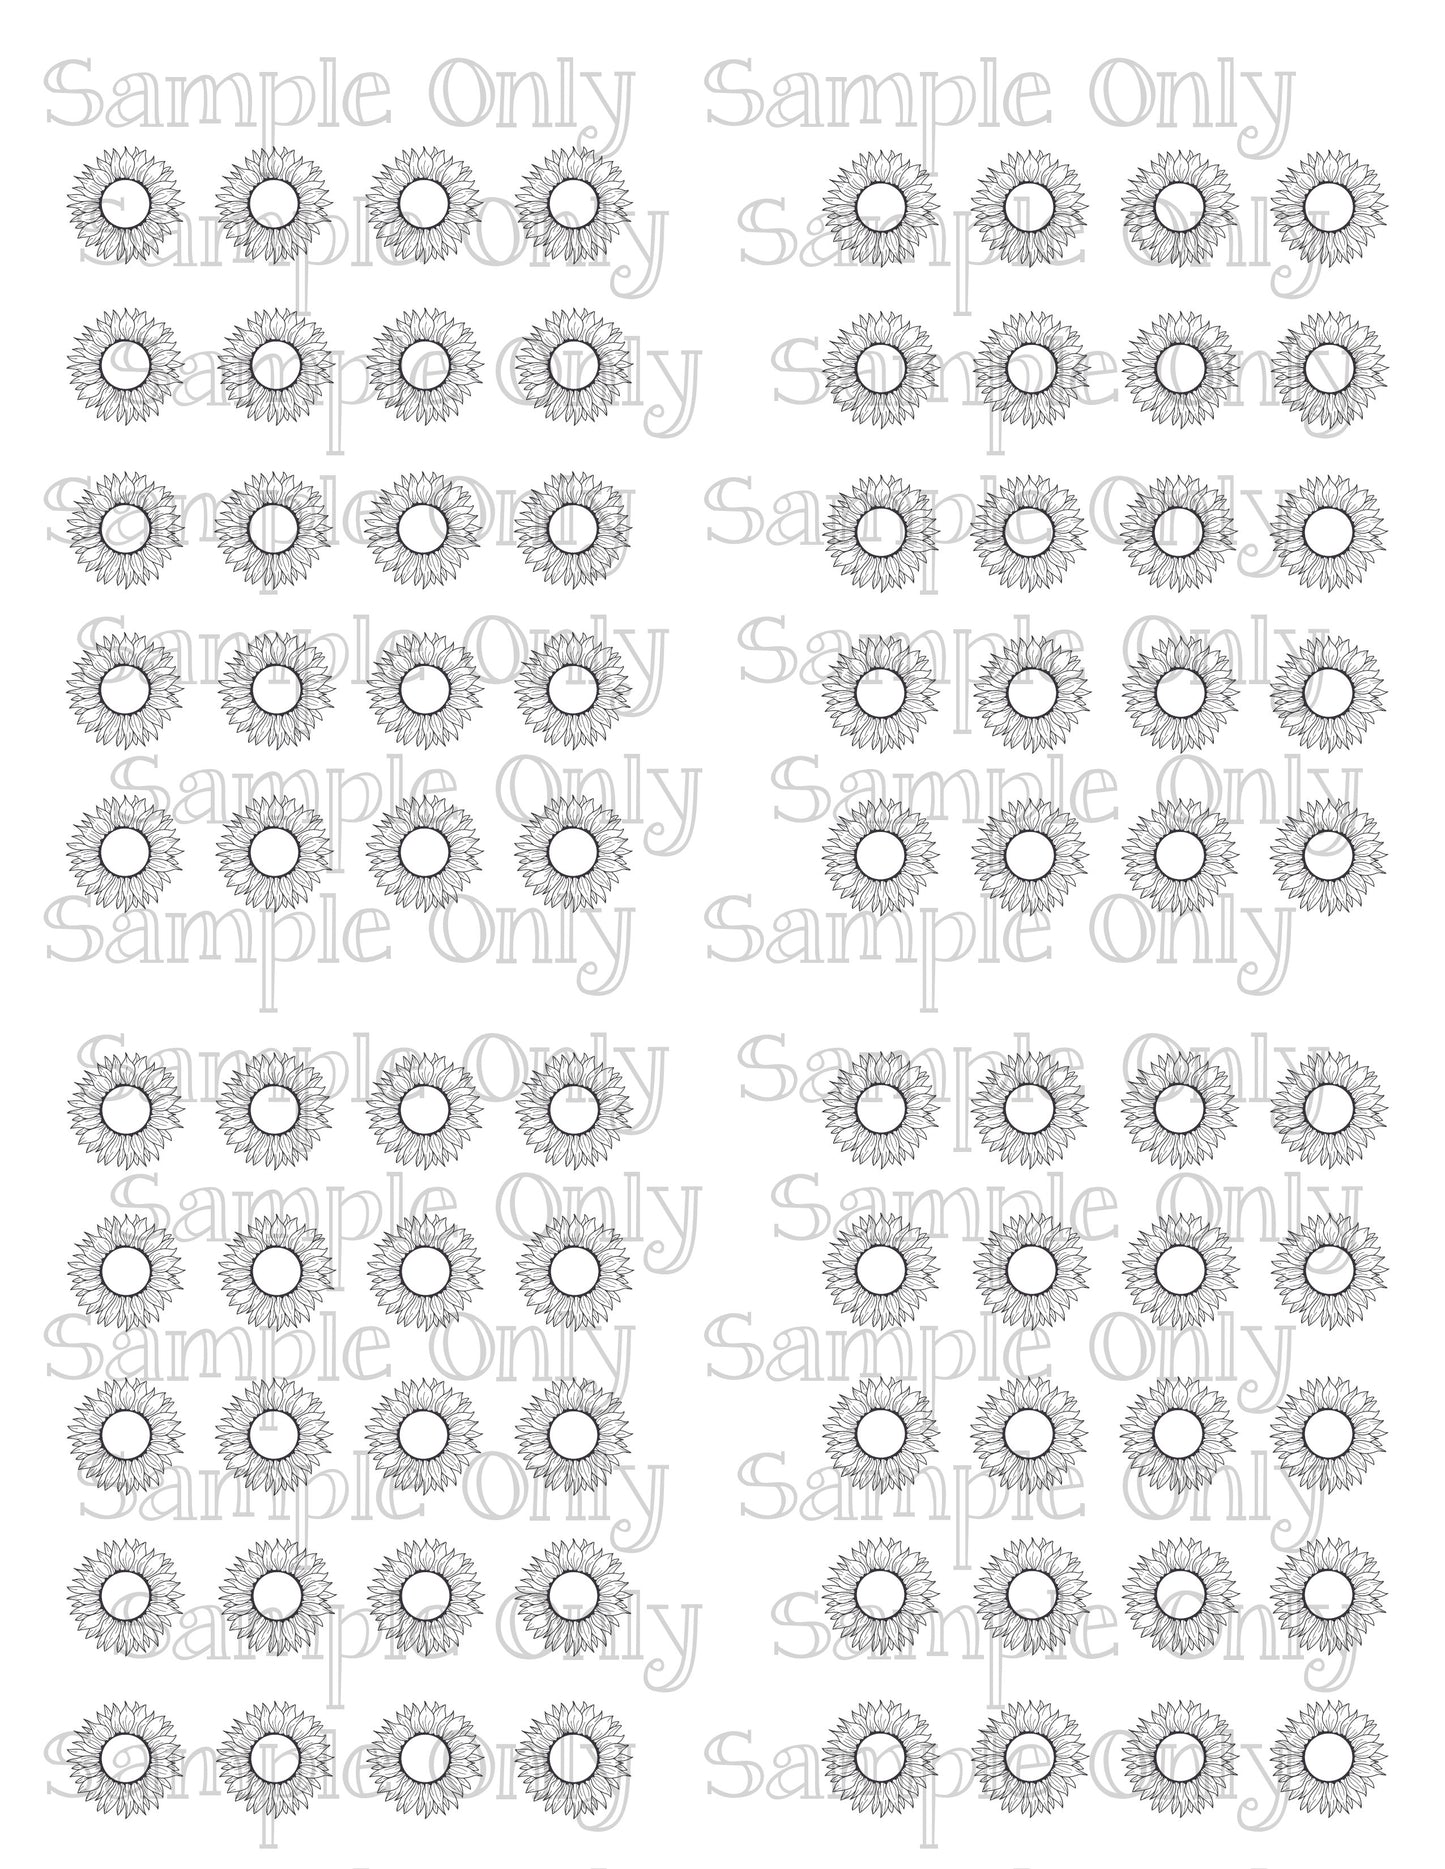 .75 Inch Sunflower Flowers Image Sheet For Polymer Clay Transfer Decal DIGITAL FILE OR PRINTED